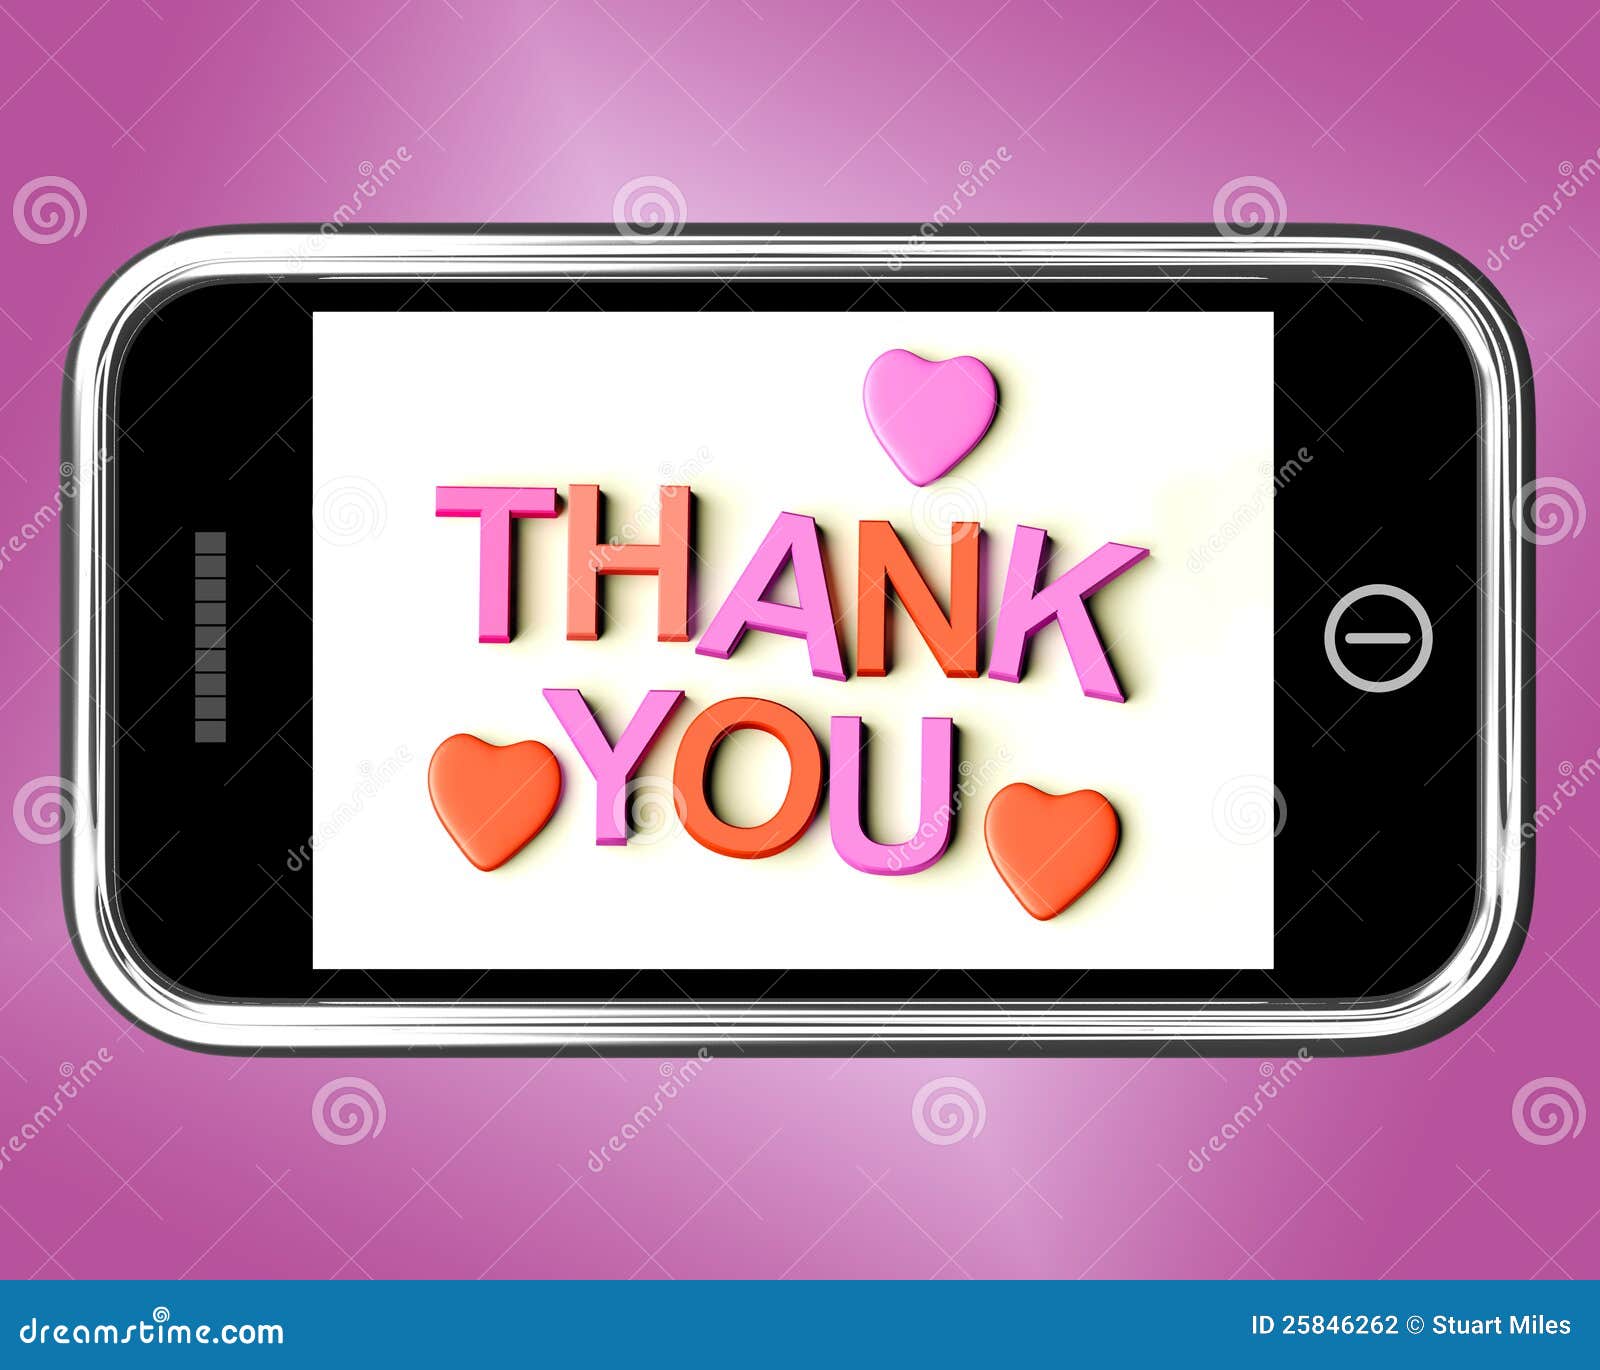 Thanks send message. Thanks message. Thank you Heart. Thank Phone. Bg thank you message.